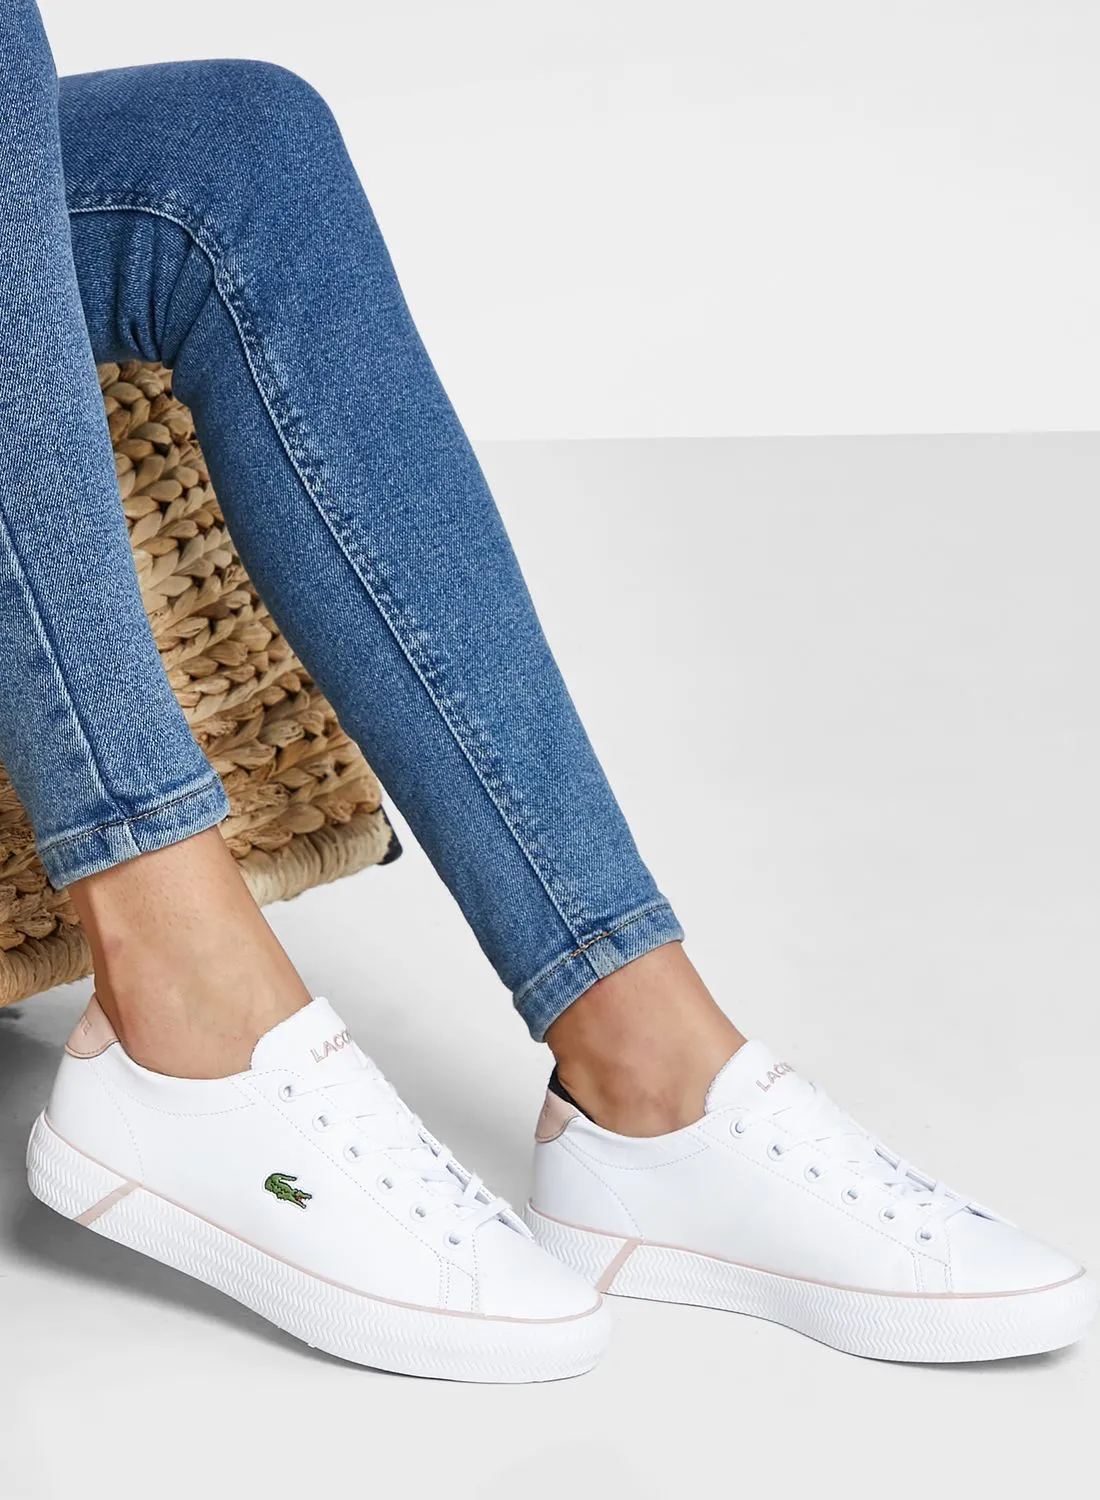 LACOSTE Gripshot Bl 21 1 Sneakers